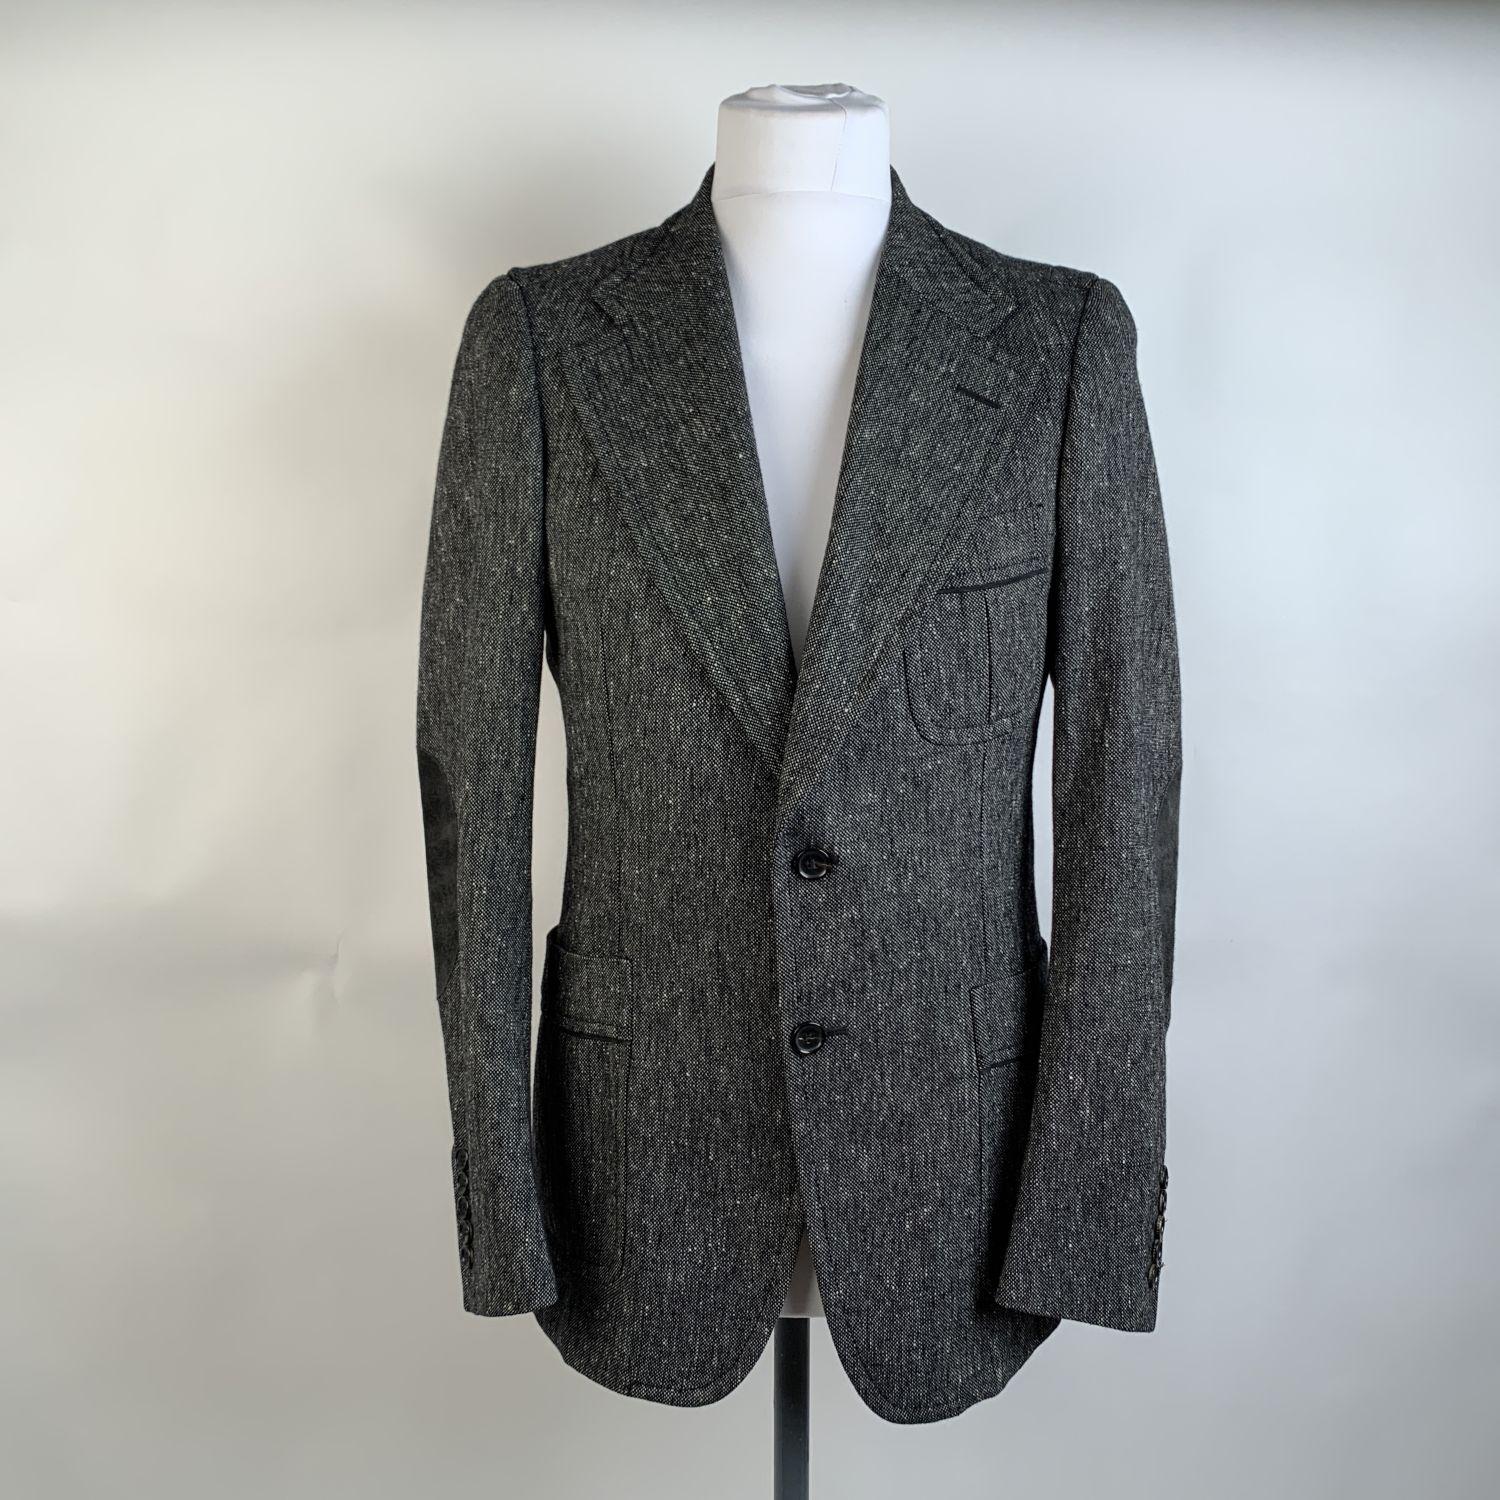 Gucci Men blazer with melange pattern. Button closure on the front. Lapel collar. Suede patches on the elbows. Composition: 80% Wool, 10% Cashmere, 10% Silk. Lined. Interior pockets. 2 open pockets on the waist and 1 chest pocket. Size: 46